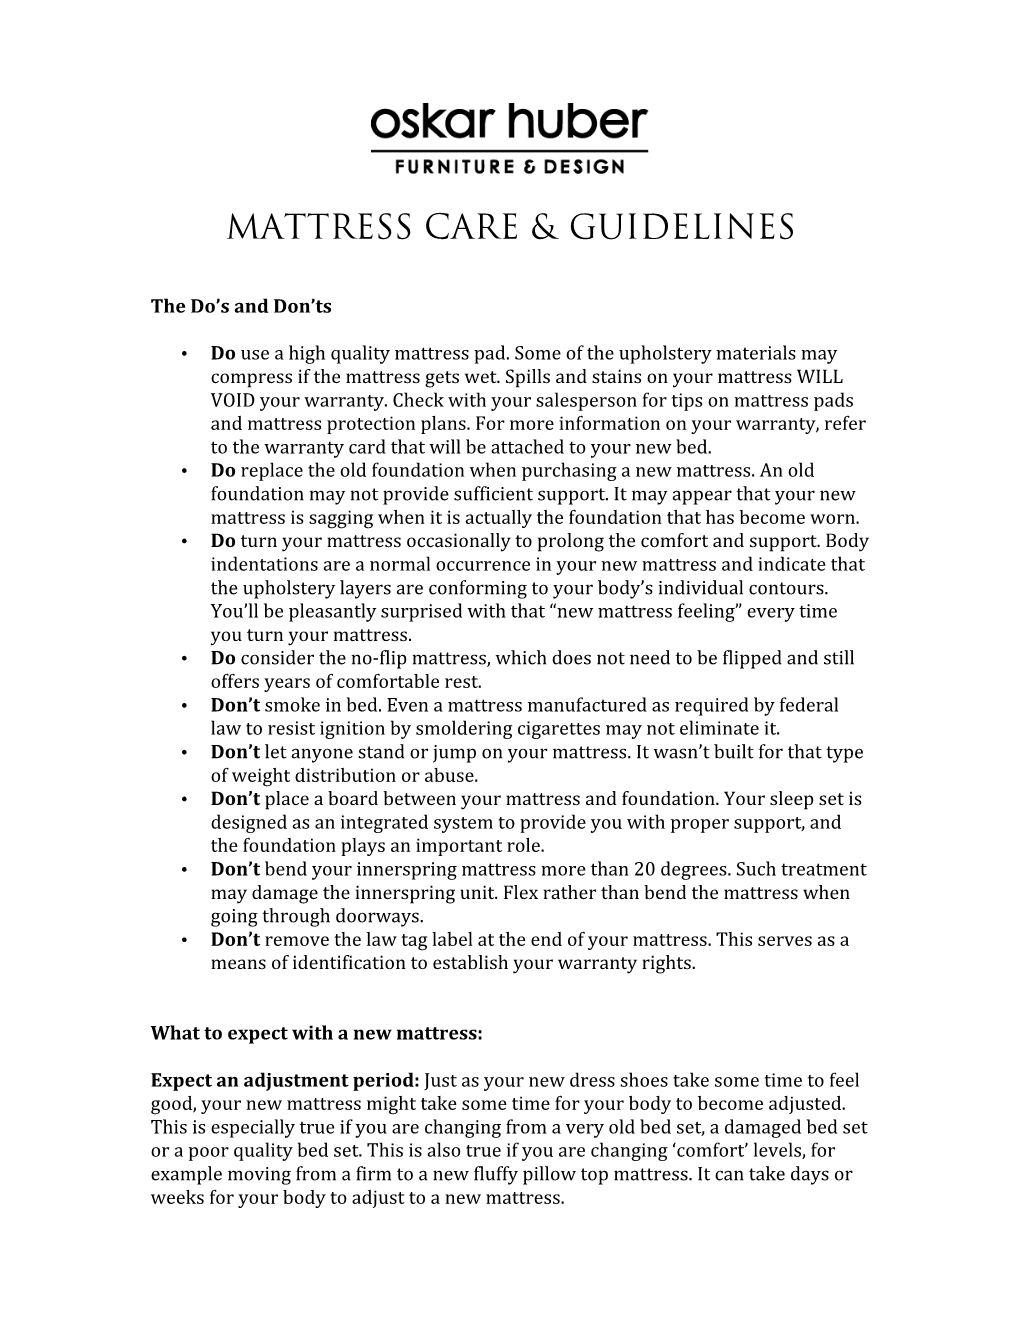 Mattress Care & Guidelines